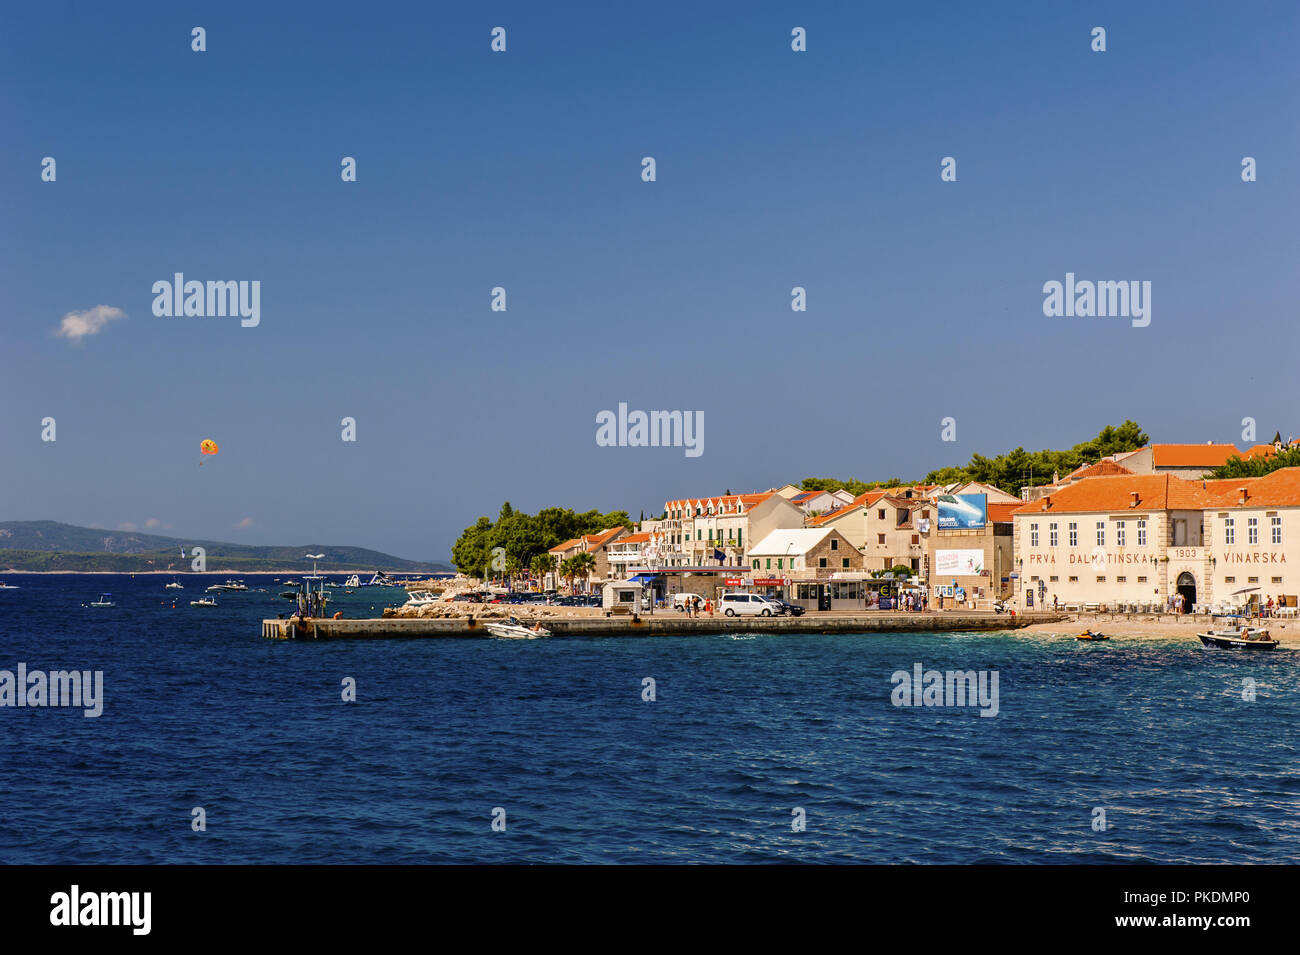 harbor in a small town on the island of Brac Stock Photo